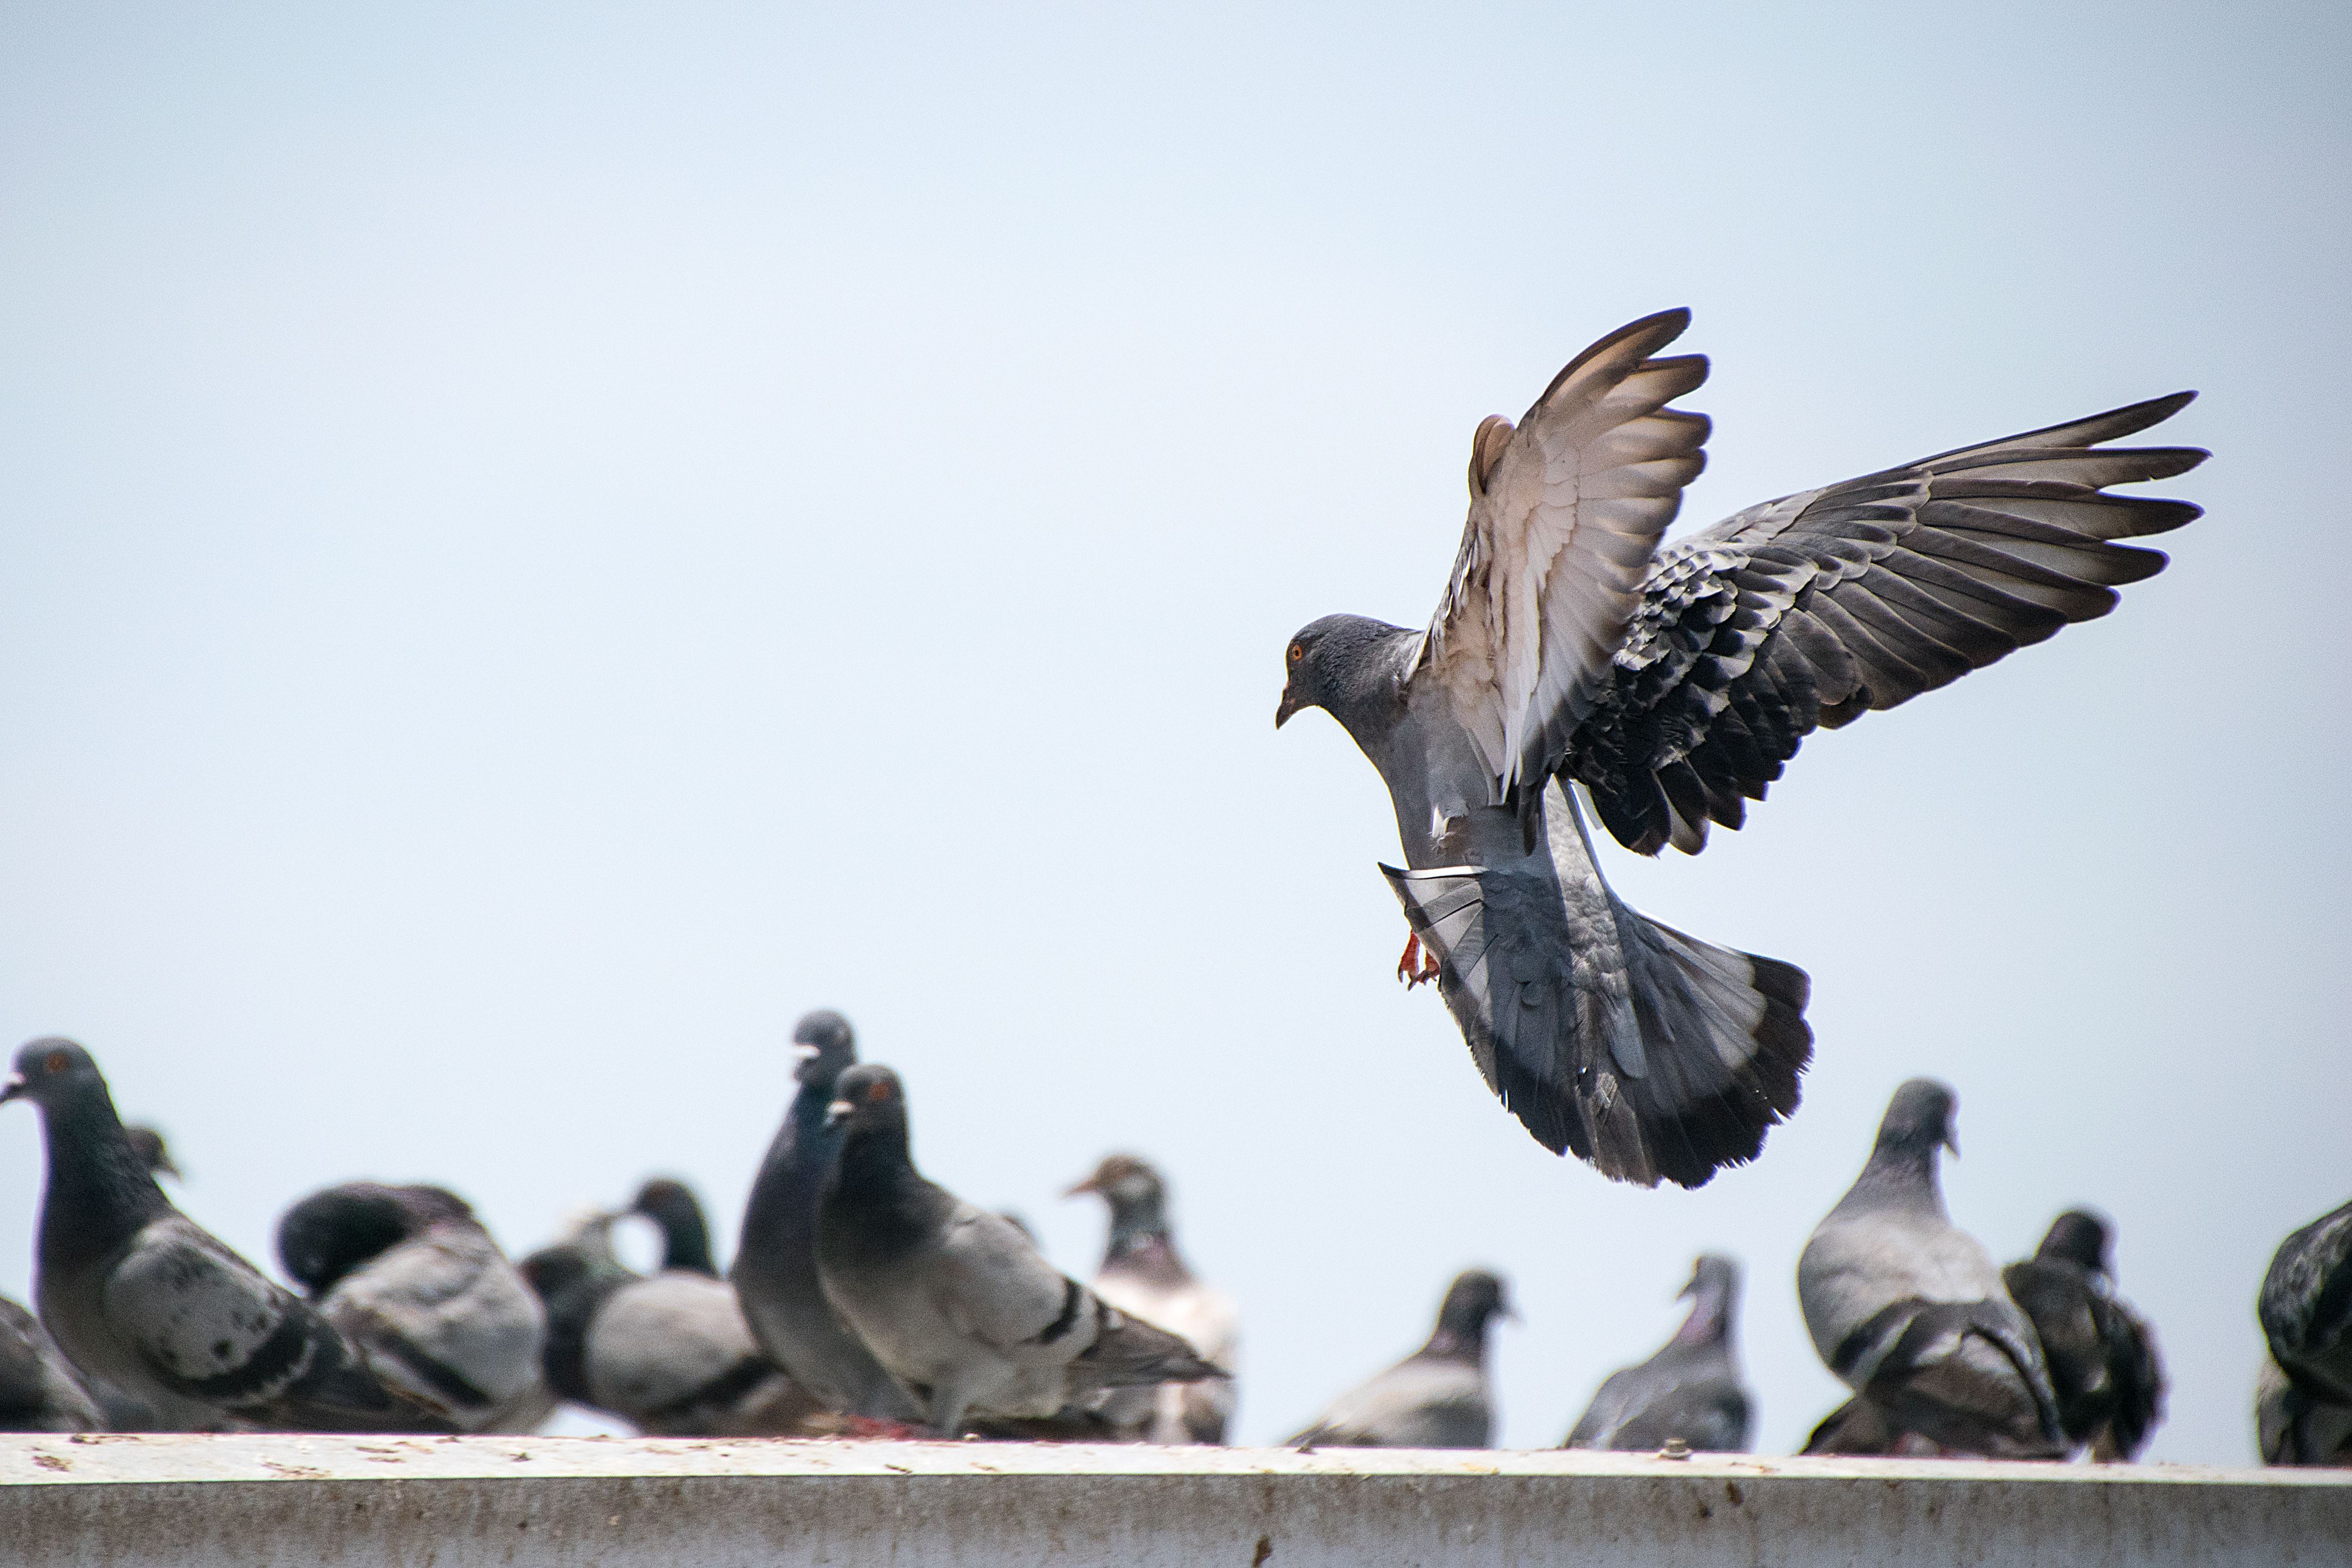 pigeons on a perch 